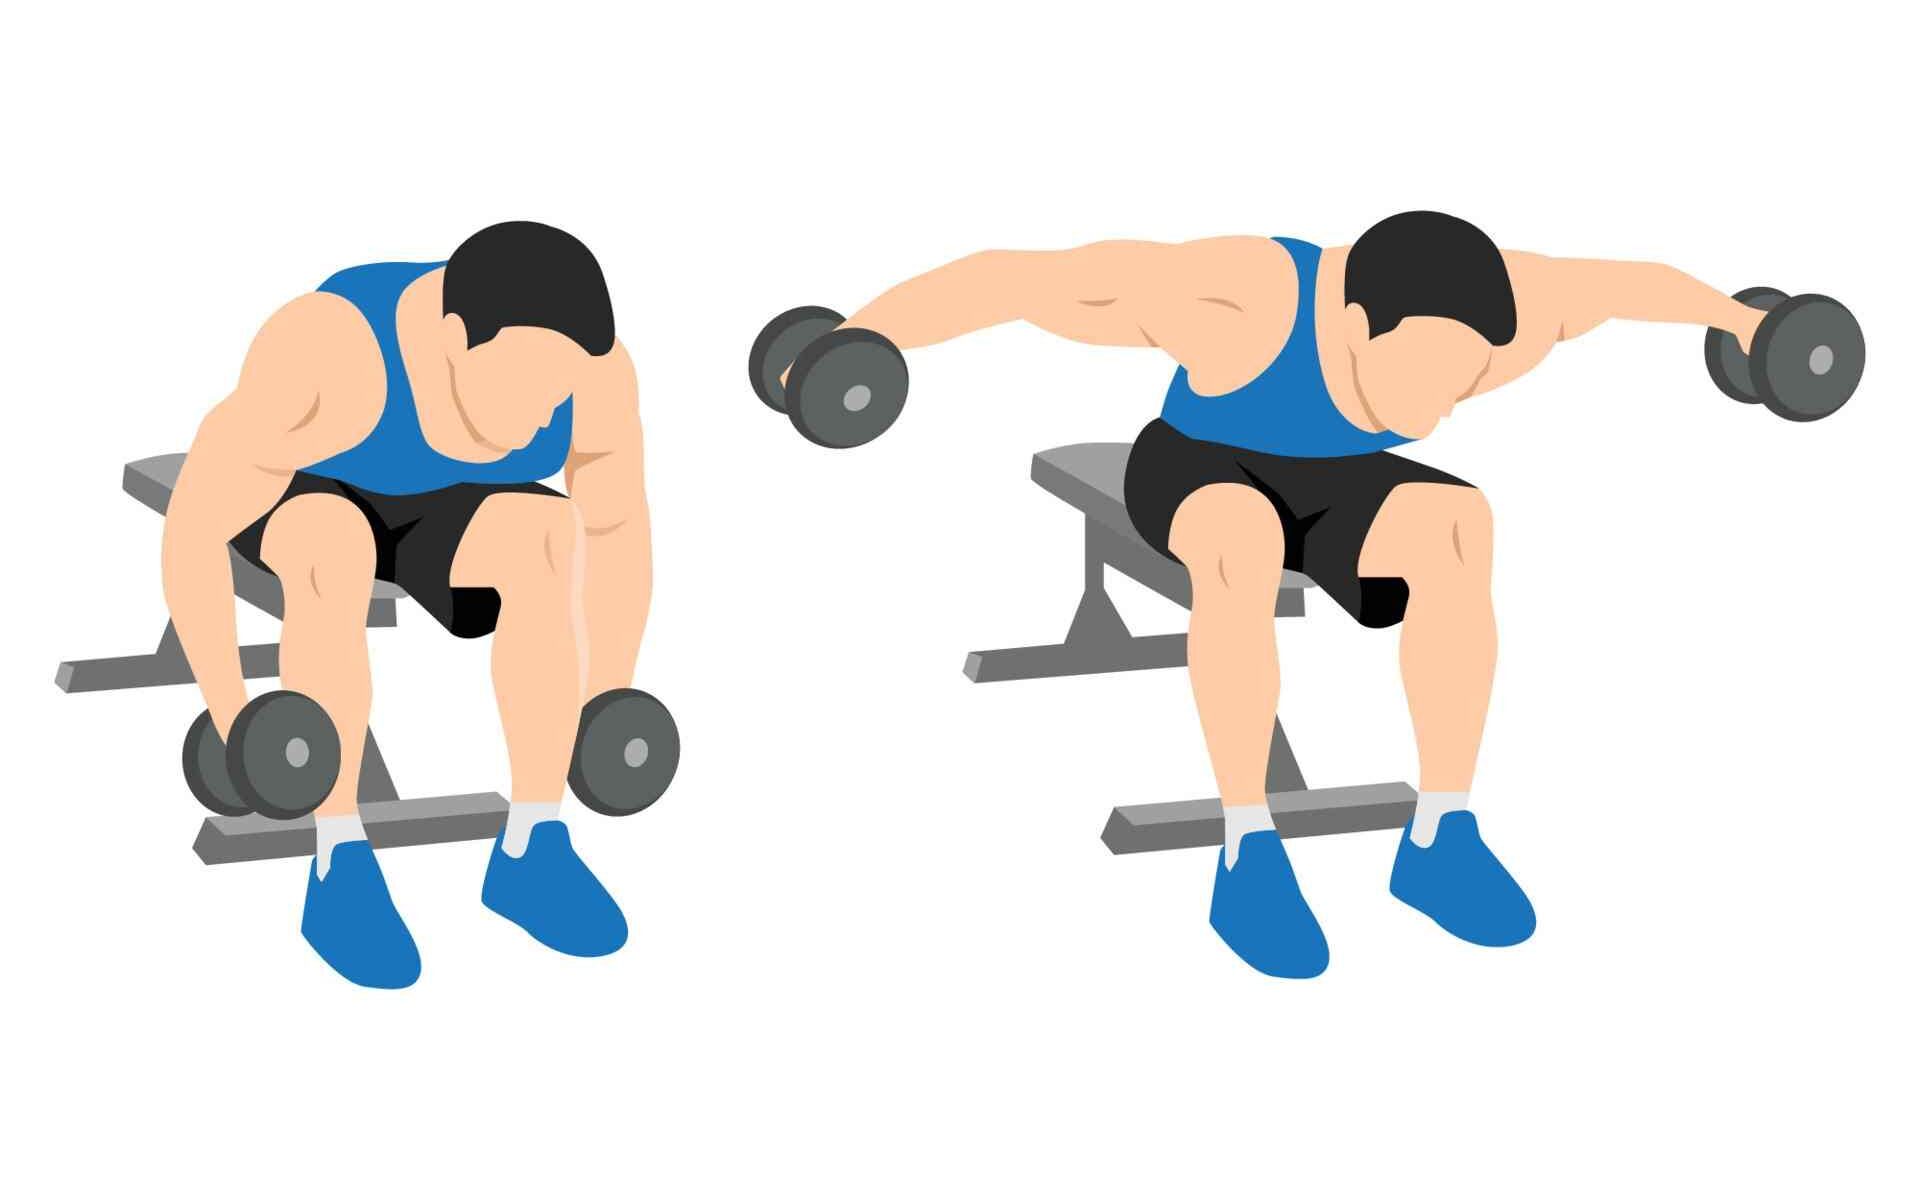 Rear Delt Exercises with Dumbbells